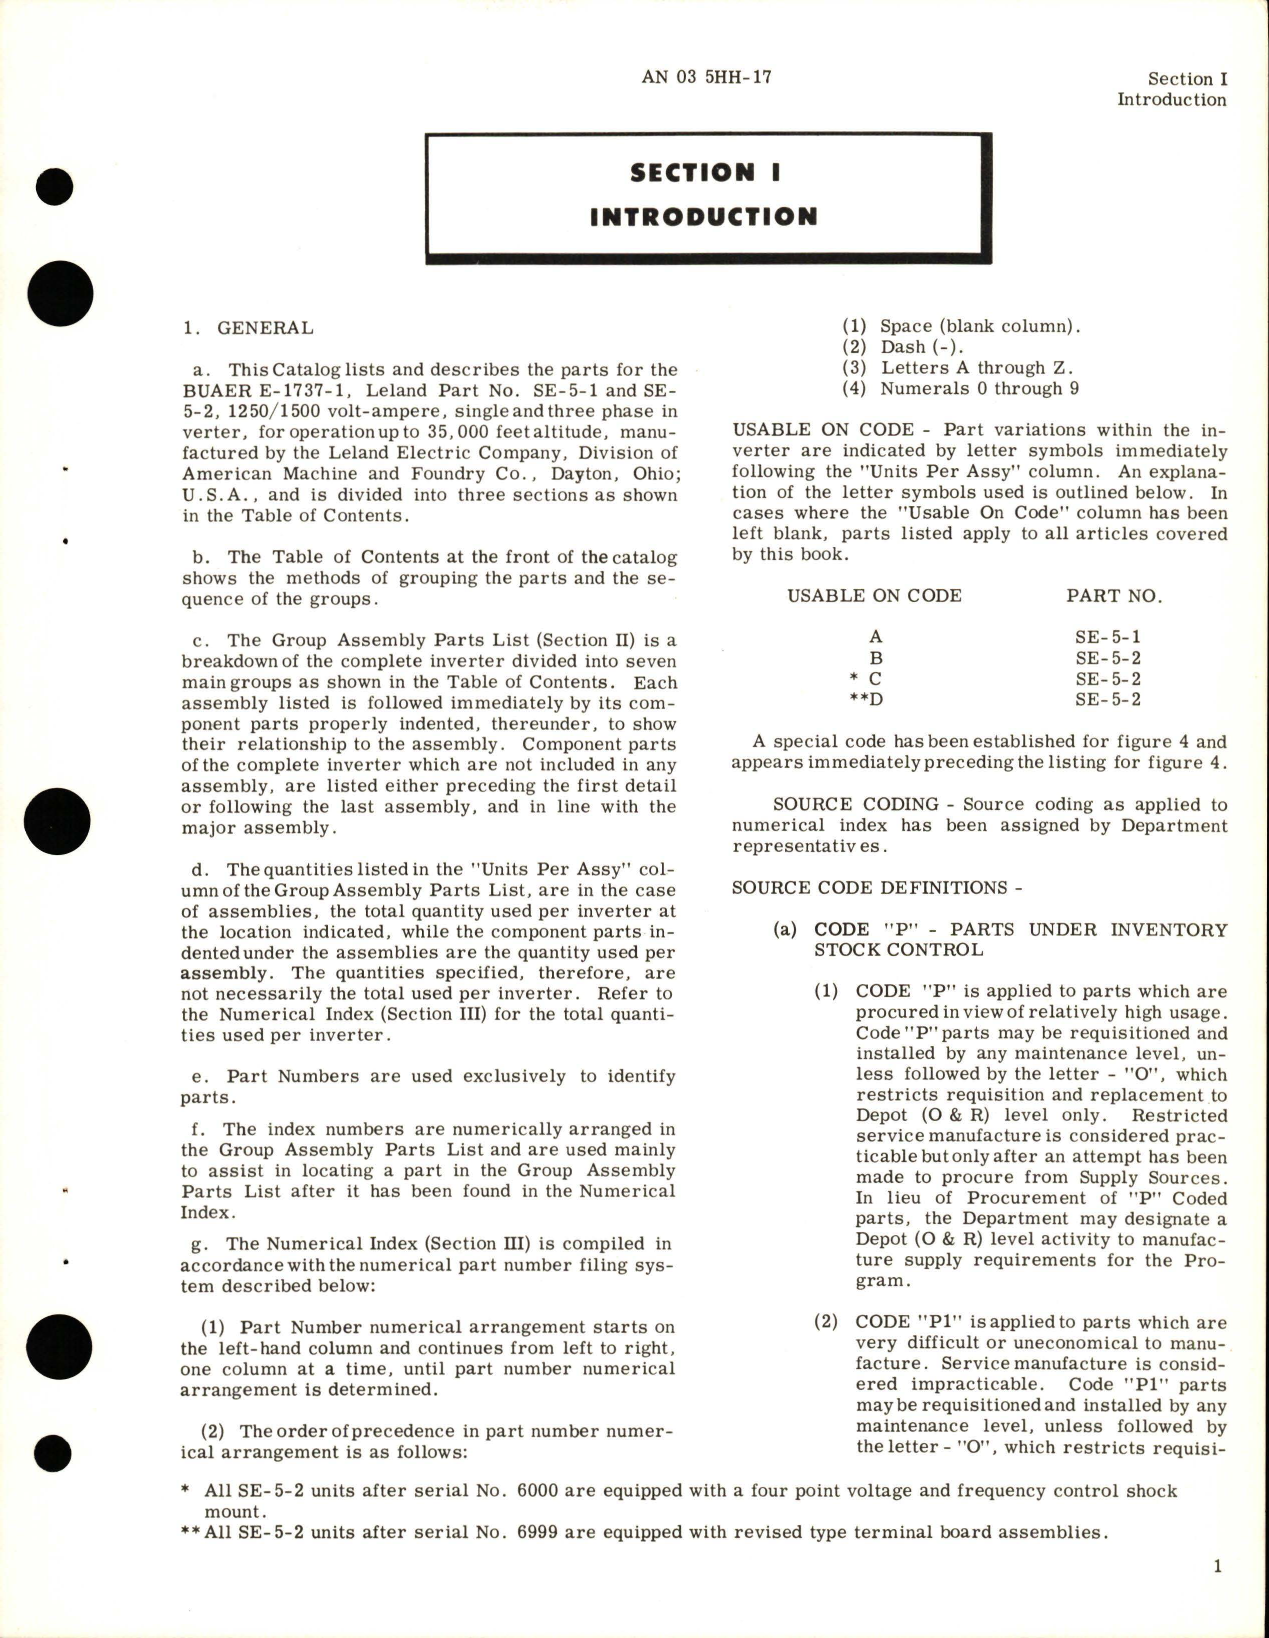 Sample page 5 from AirCorps Library document: Illustrated Parts Breakdown for Inverter - Parts SE-5-1 and SE-5-2